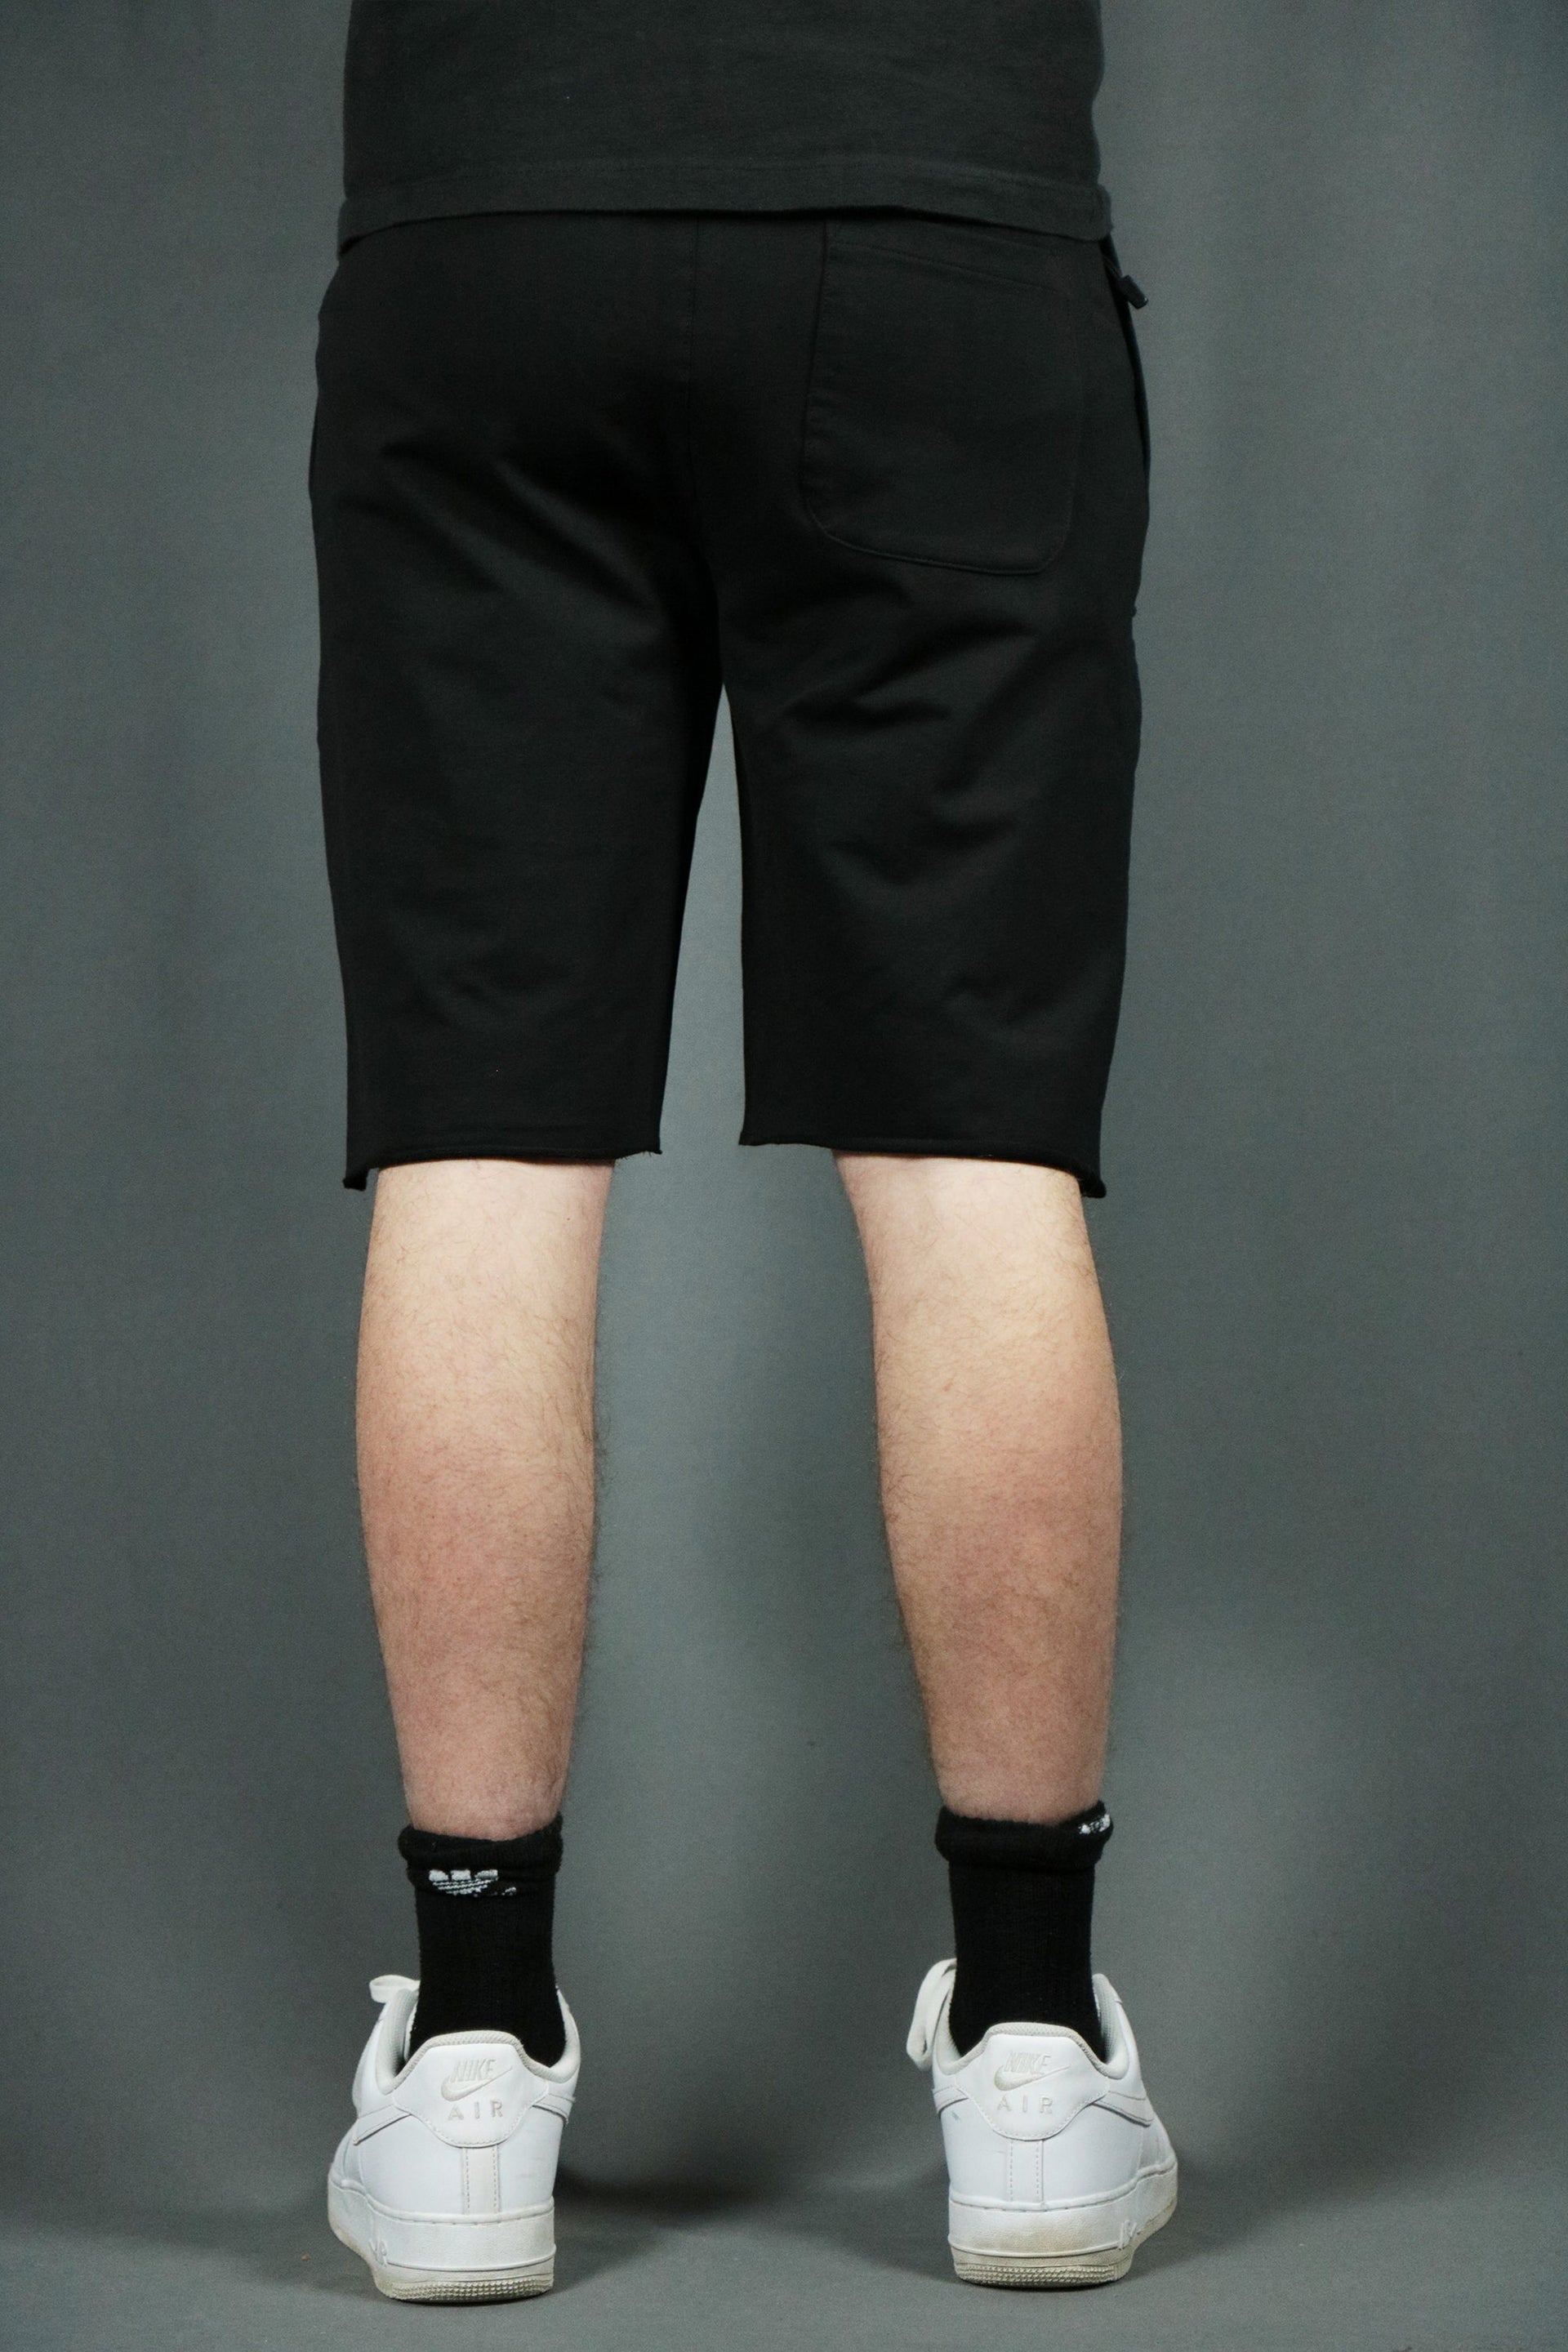 The backside of the black men's french terry shorts by Jordan Craig.